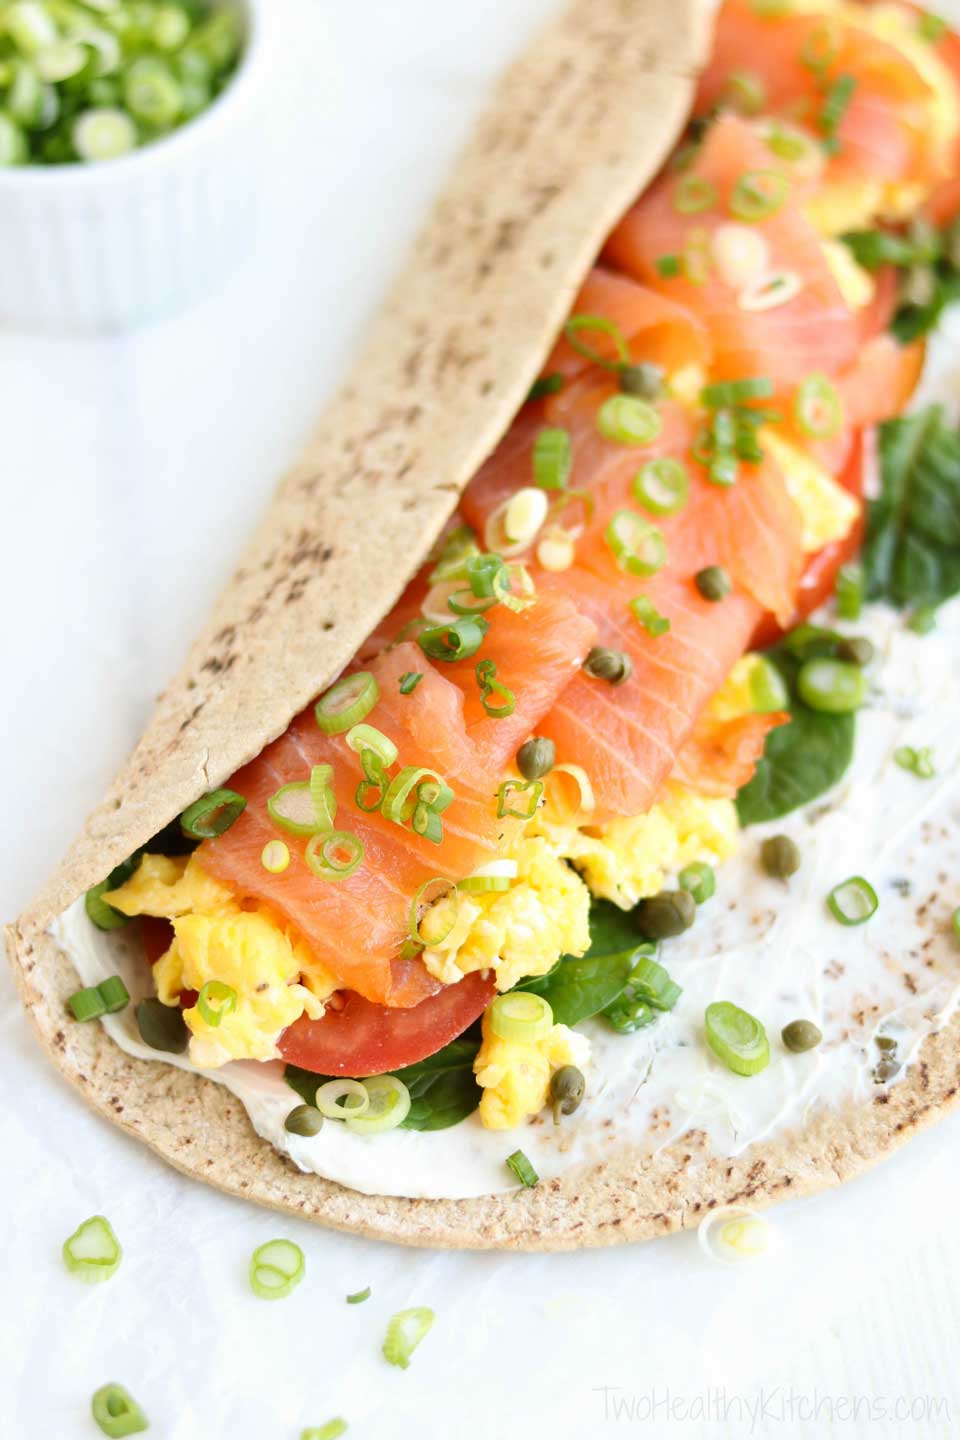 Ready in just minutes! Warm, fluffy eggs with luxurious smoked salmon, velvety cream cheese, and bright, fresh veggies – deliciously layered in this super-fast Smoked Salmon Breakfast Wrap that'll have you out the door in no time! Full of protein, fiber and veggies, it's absolutely delicious and also nutritious enough to keep you powered up all morning long! With luxurious smoked salmon, this easy breakfast wrap recipe is an upscale twist on typical egg wraps! {ad} | www.TwoHealthyKitchens.com 